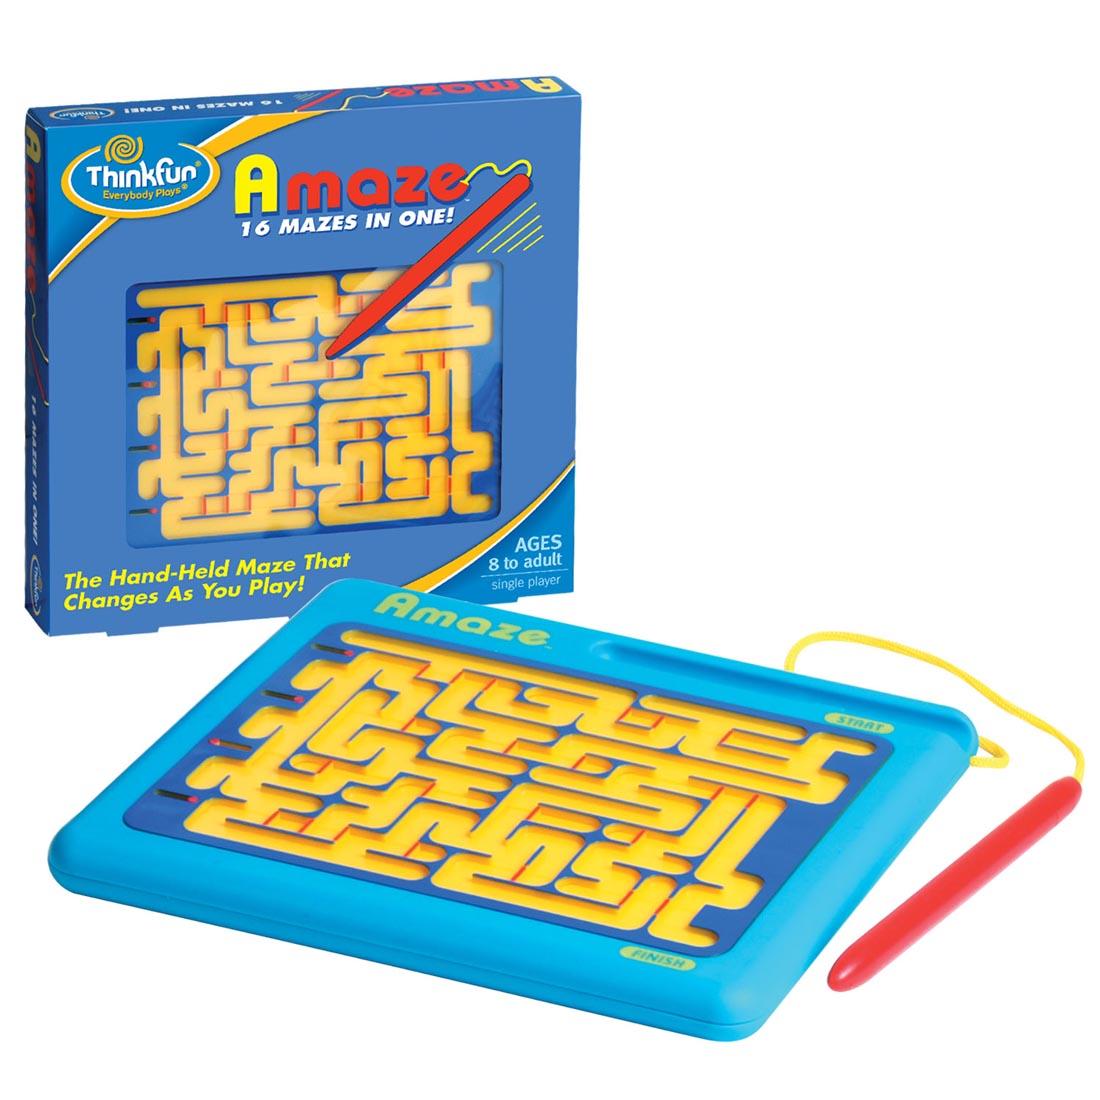 Thinkfun Amaze Game shown both in and out of package